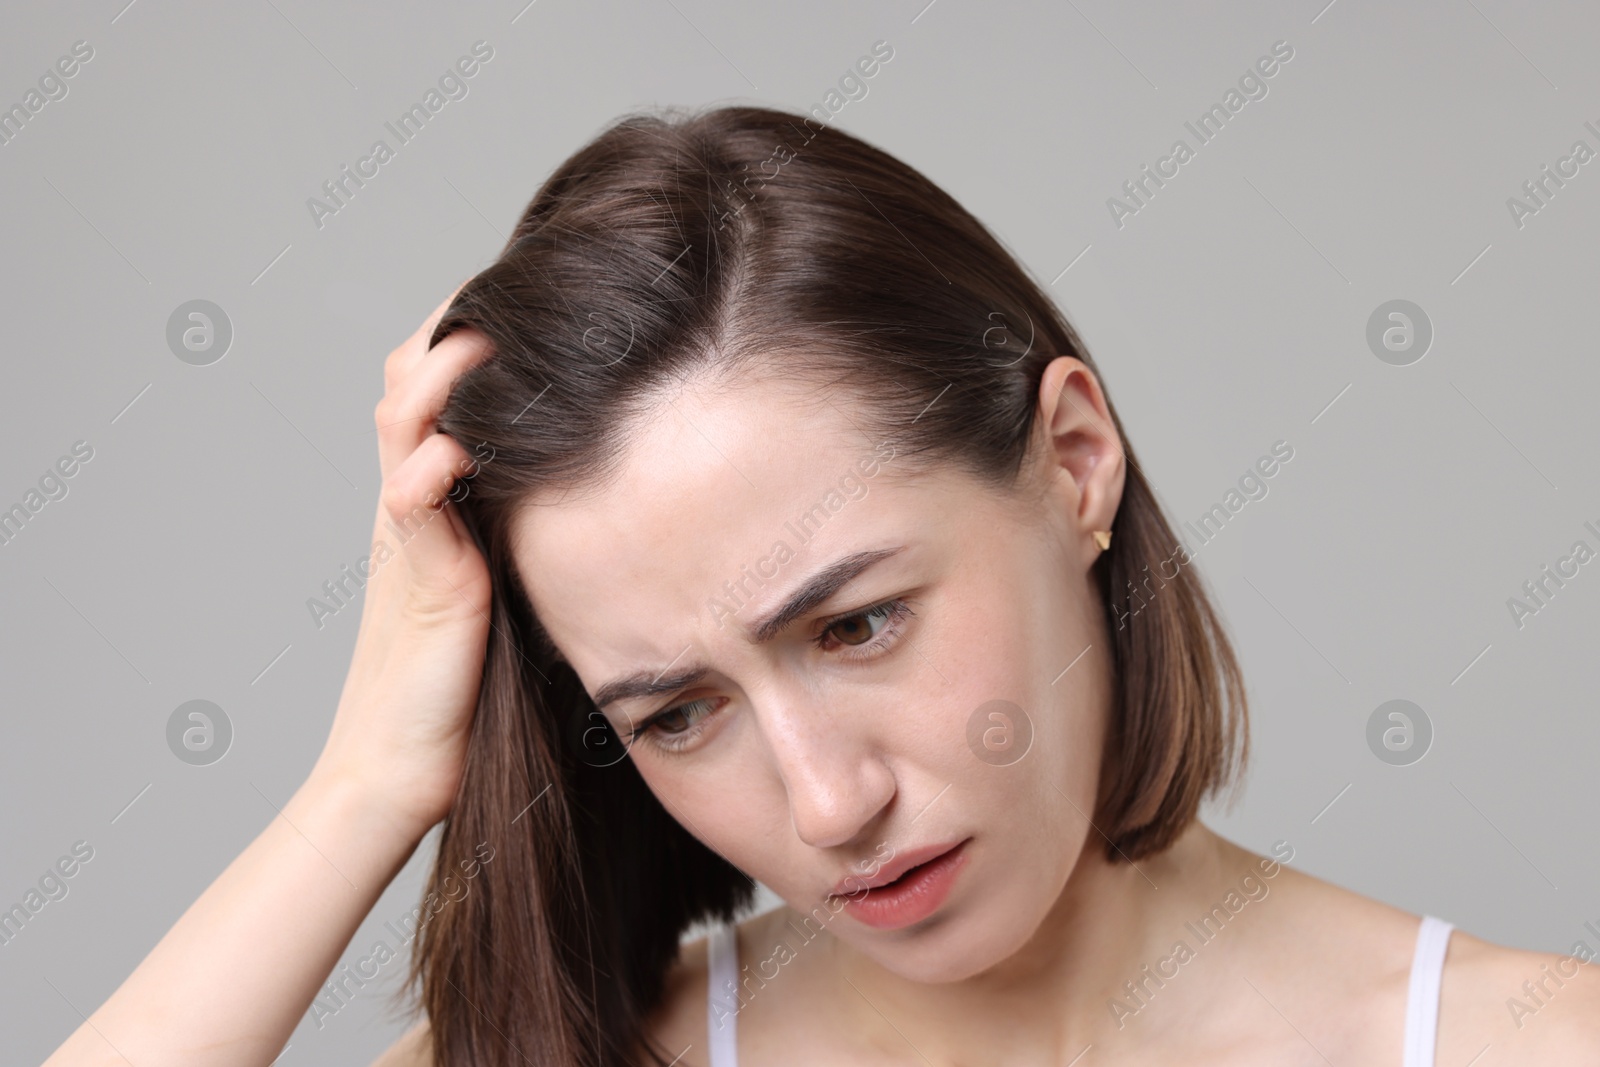 Photo of Sad woman with hair loss problem on grey background